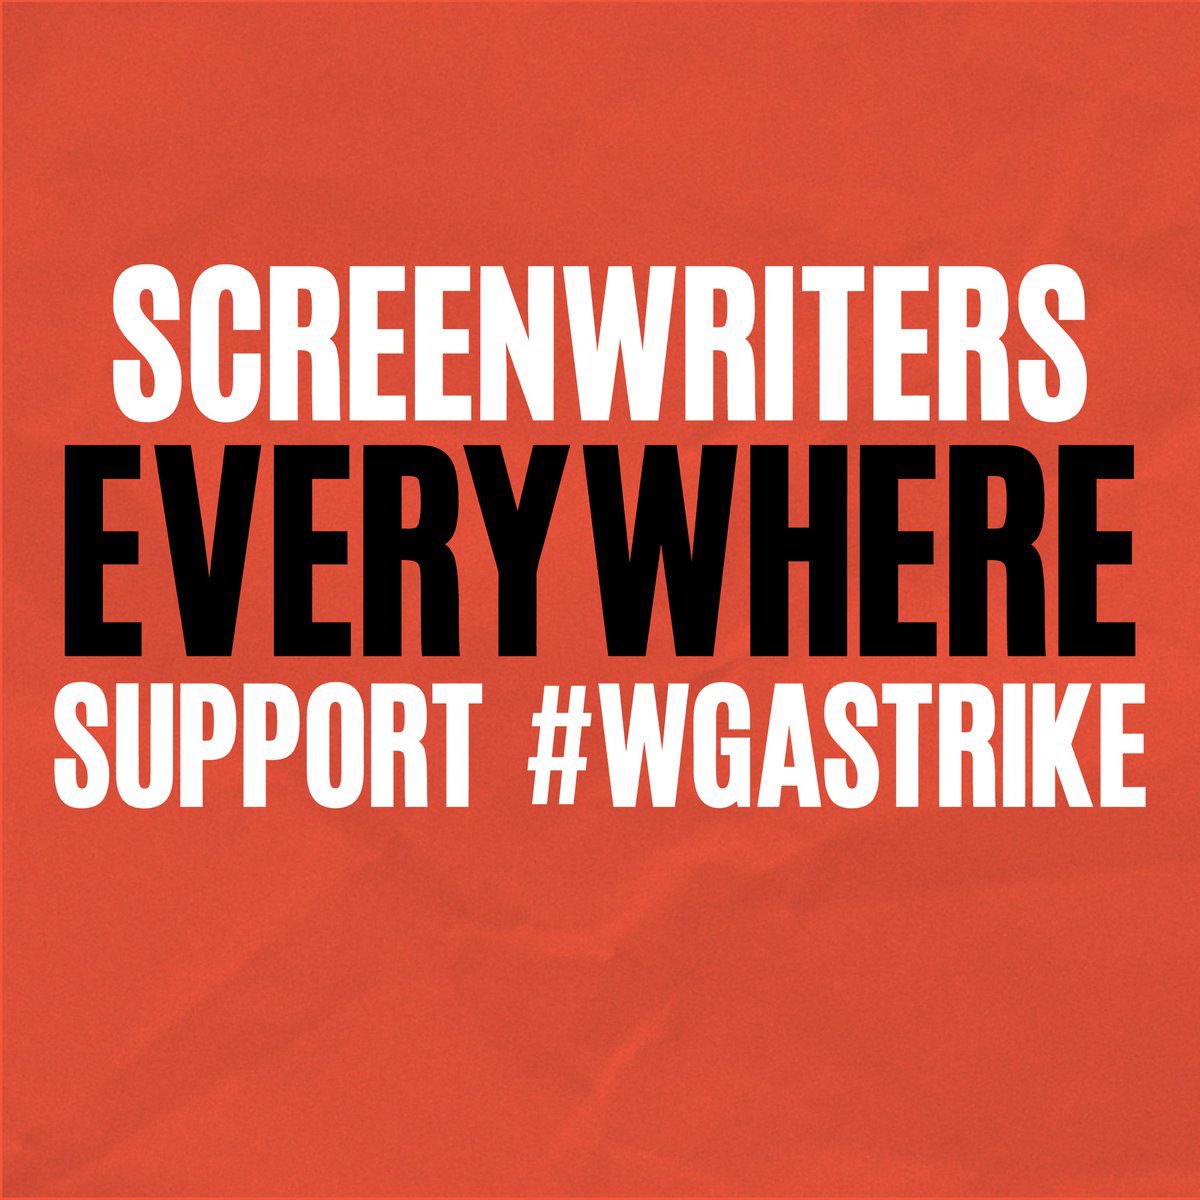 If you’re an aspiring writer here in the UK it’s easy to not engage with what’s happening. But our US friends are fighting for rights that will matter in every single one of our careers. We’re with you! @WGAWest @WGAEast @TheWritersGuild @uk_scribe #ScreenwritersEverywhere